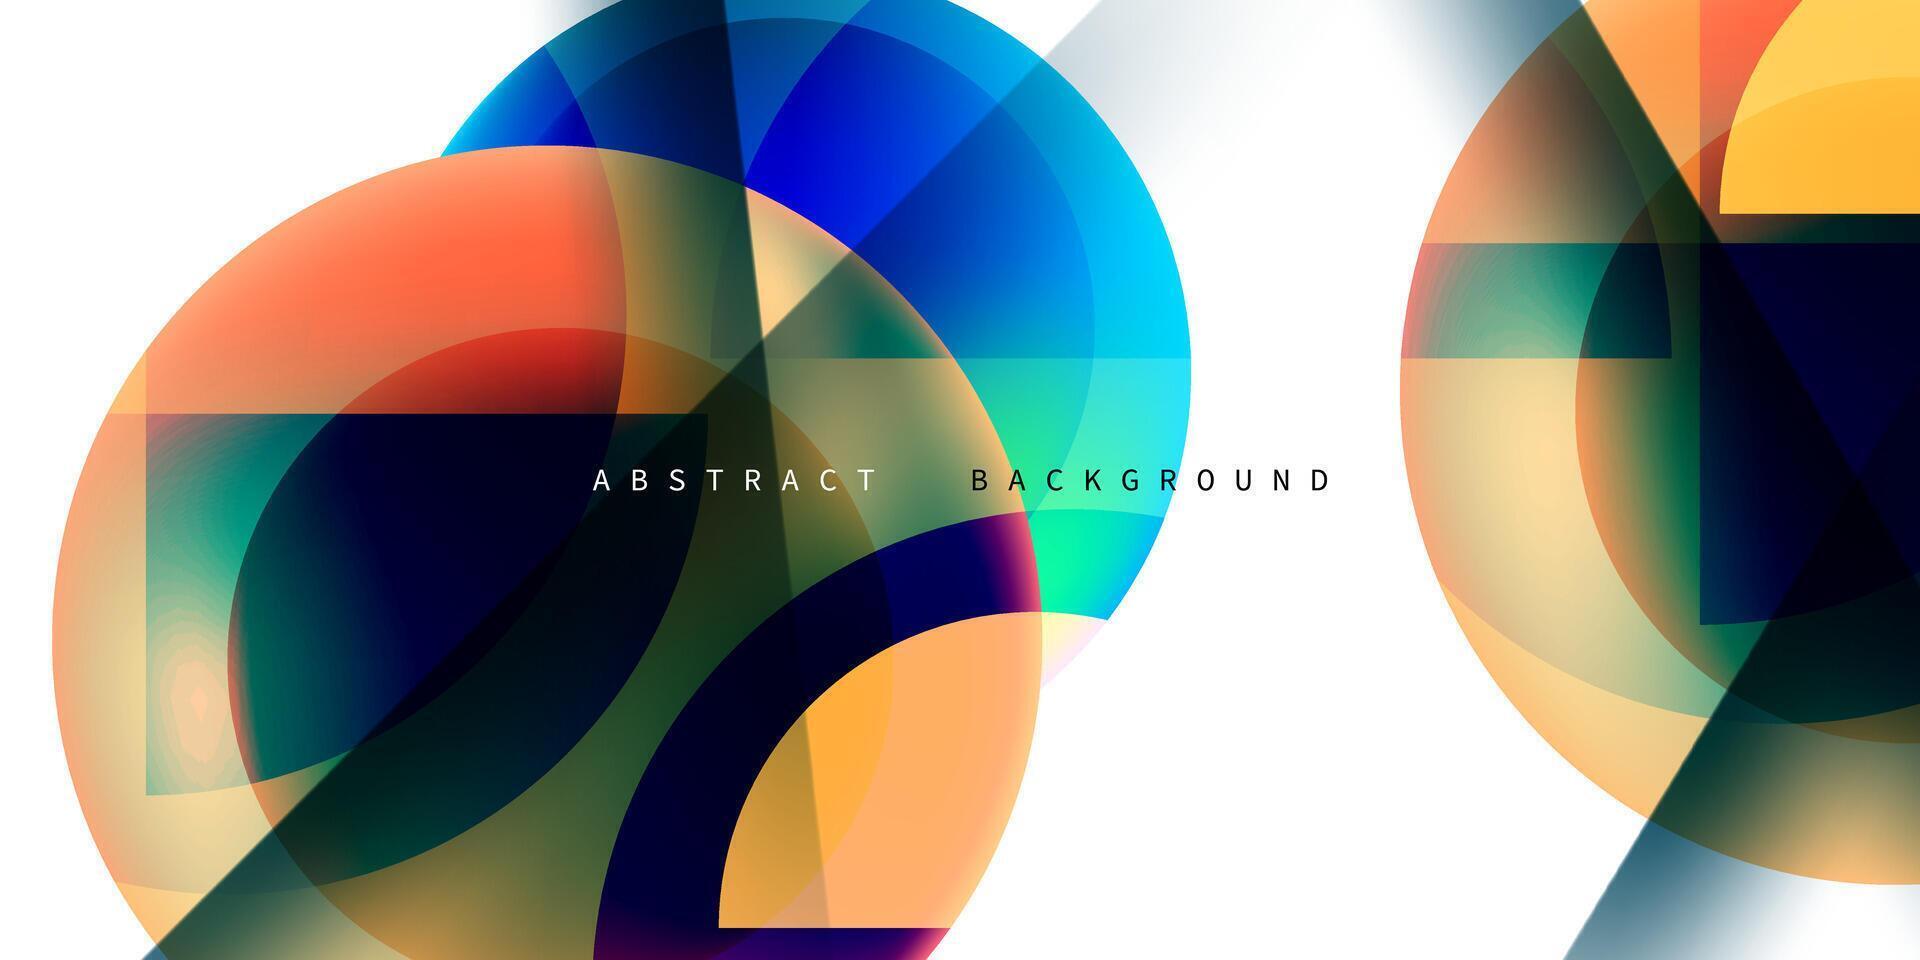 overlapping abstract background color Modern element vector illustration for background, banner, template or website page.